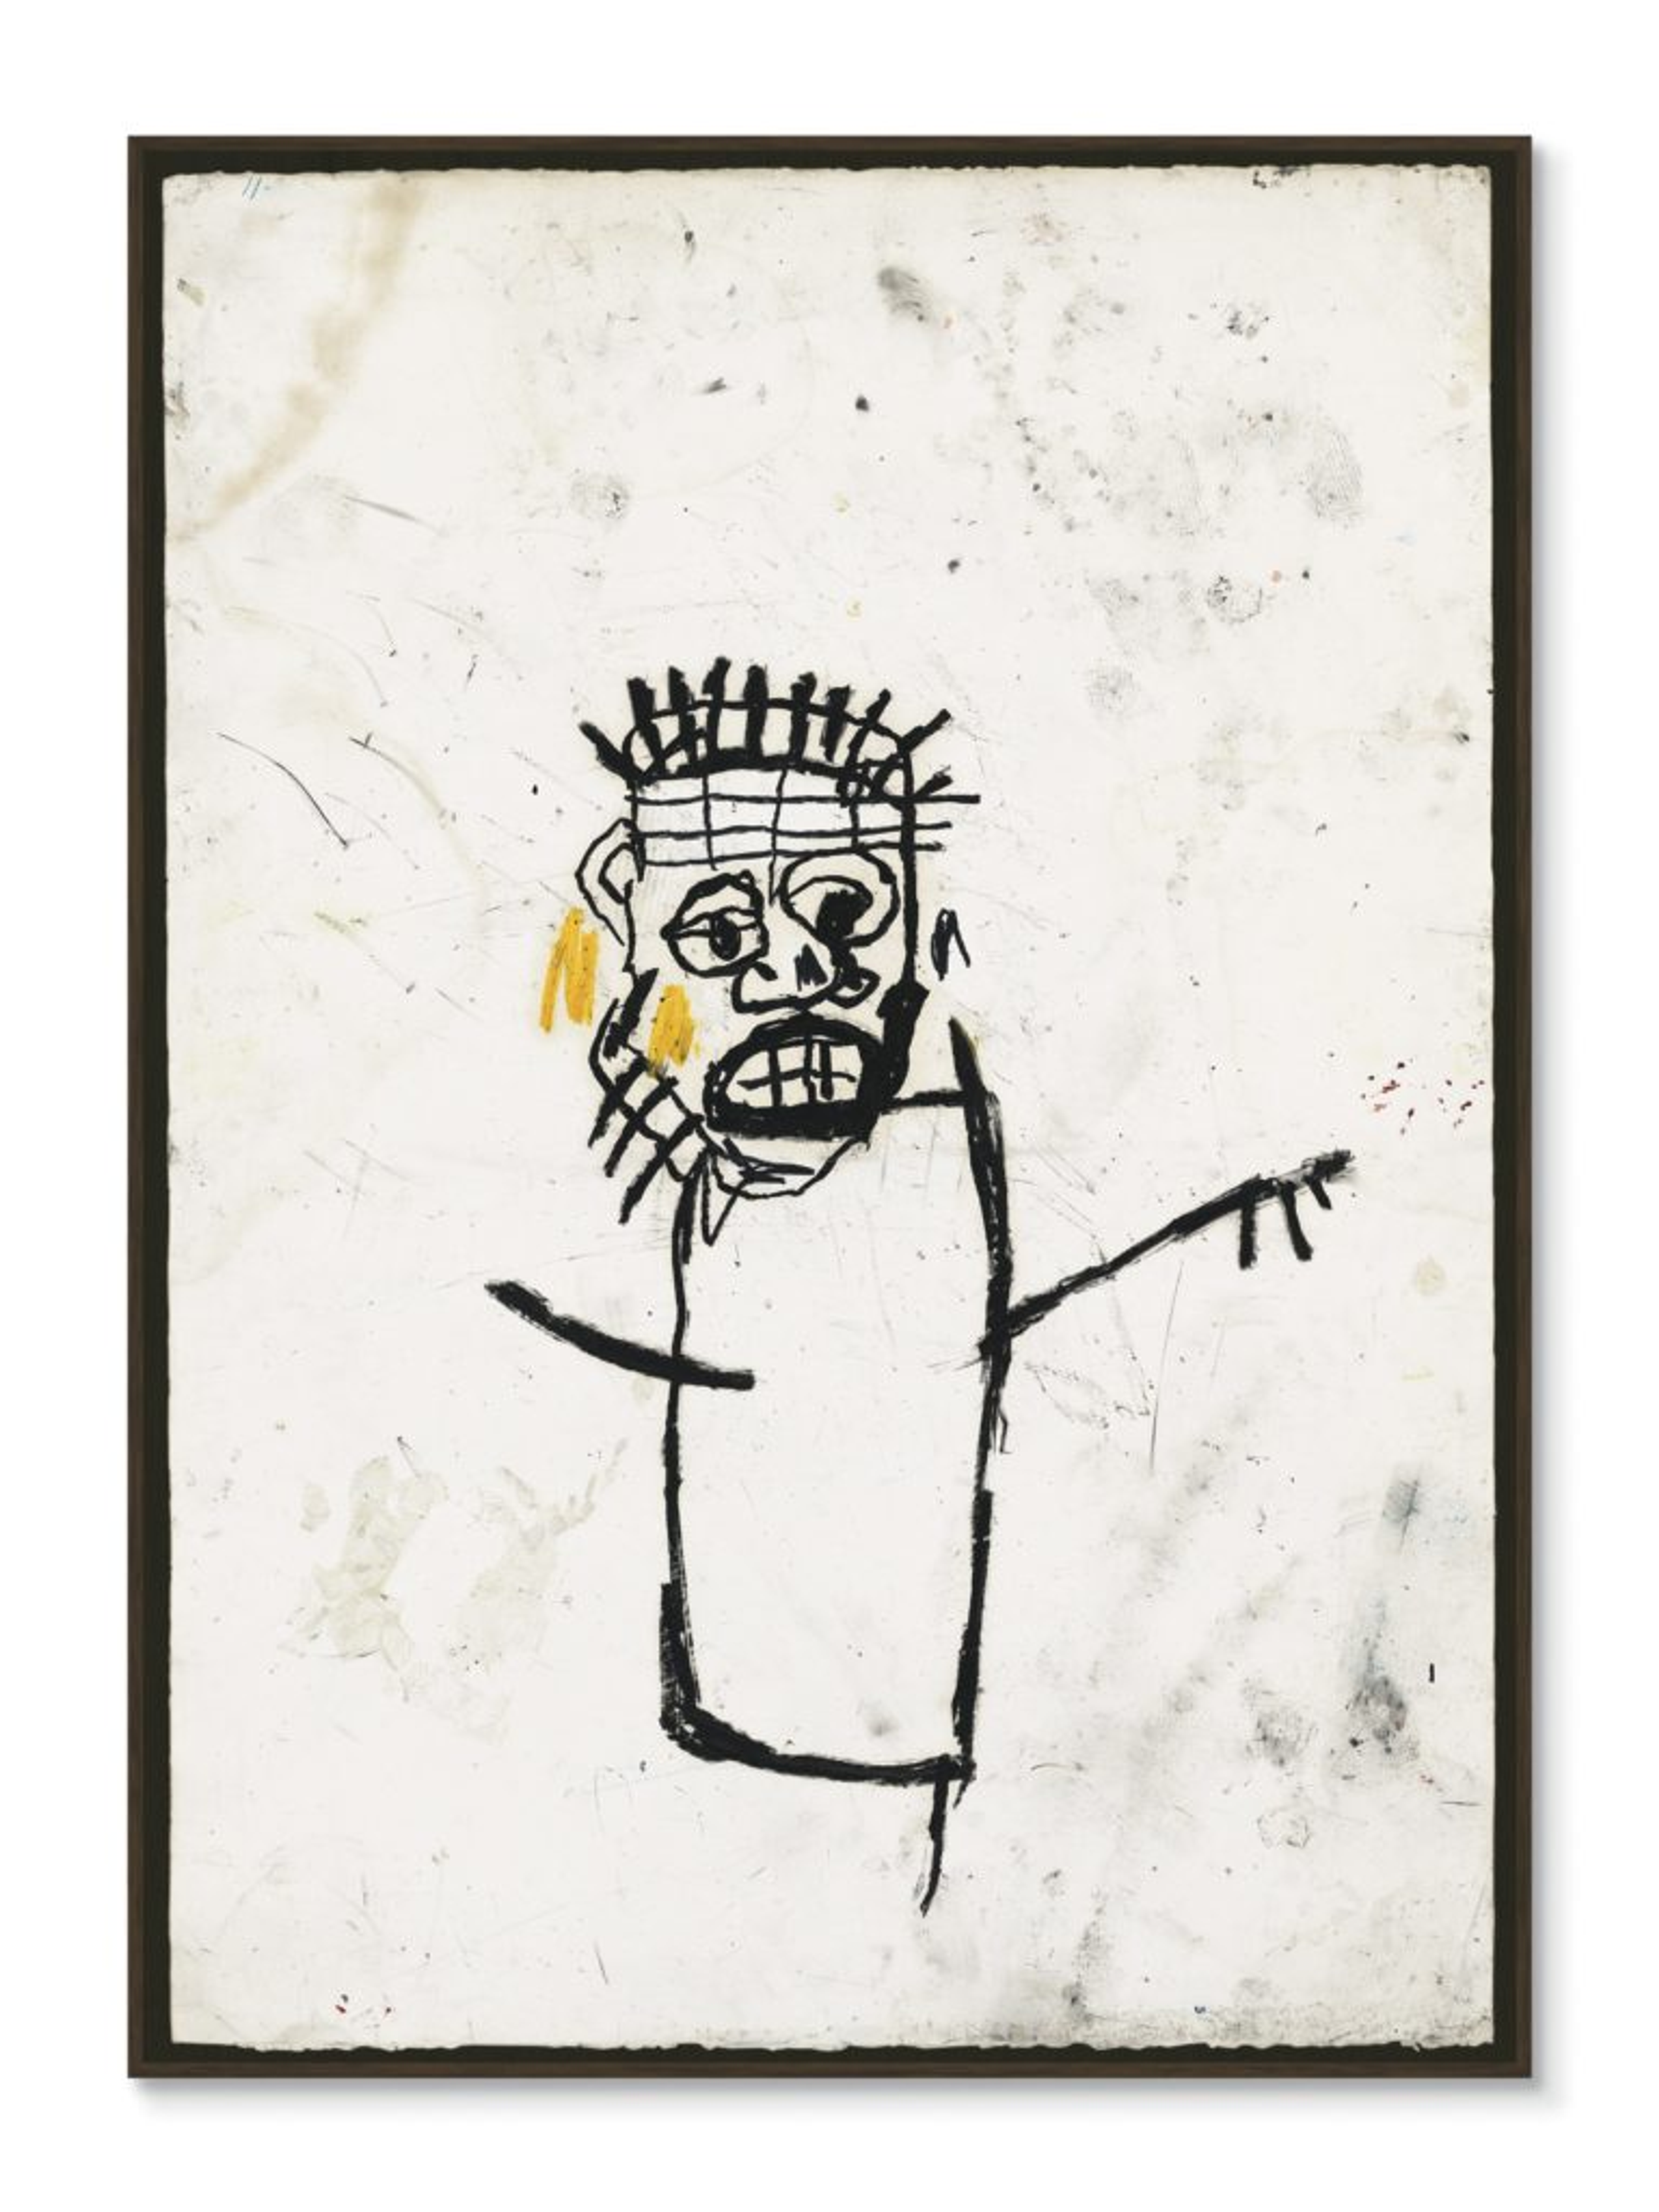 In Untitled (1982), Basquiat depicted the artist as a frail stick figure, with a tear in his eye. He is depicted simply, in basic black lines against a white background.